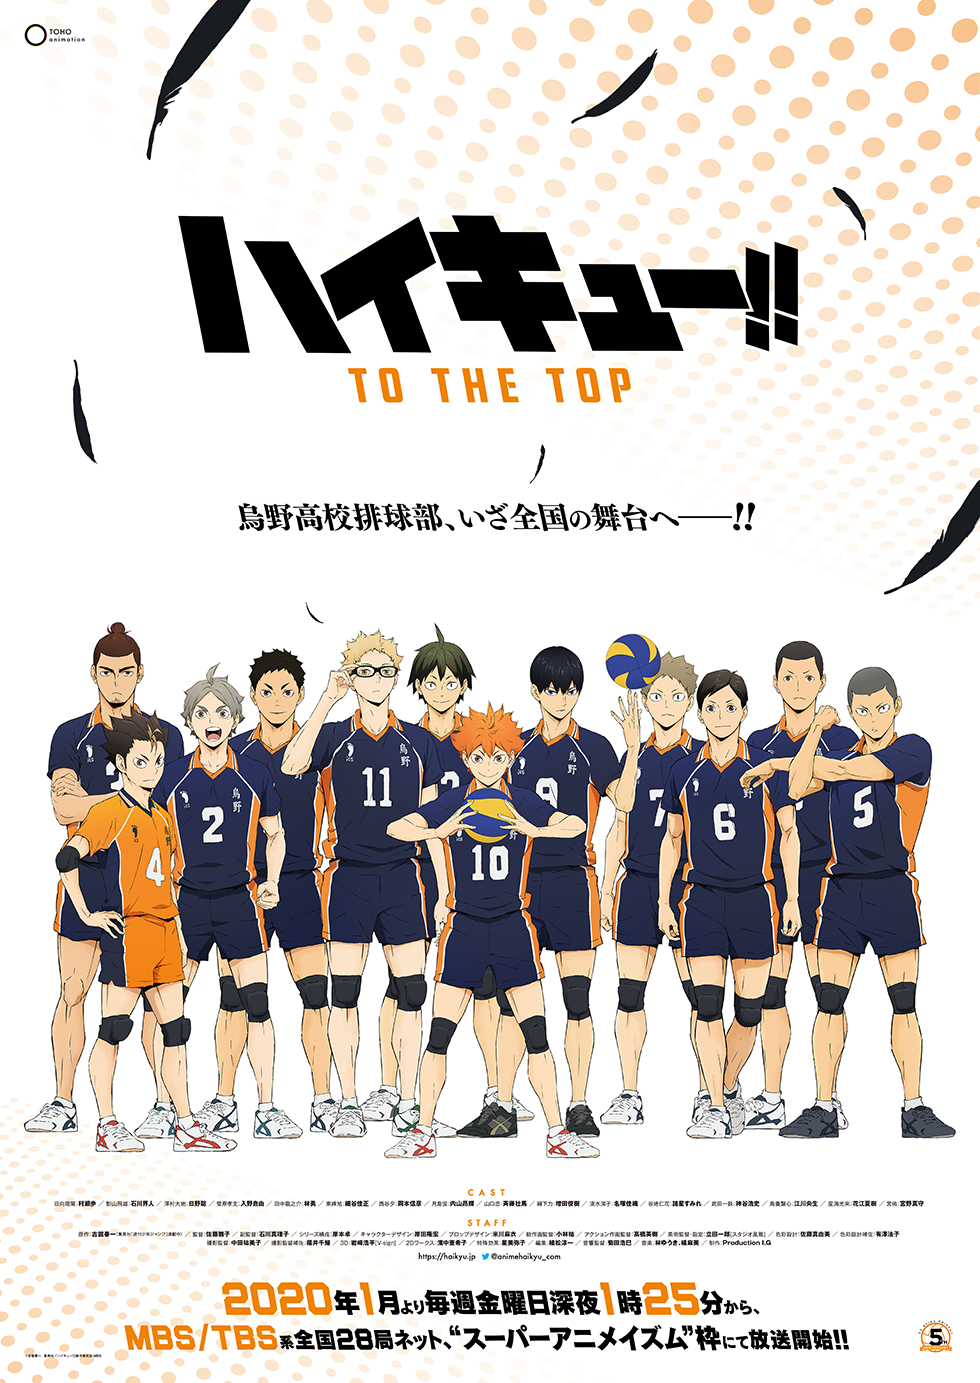 Production I G ハイキュー To The Top